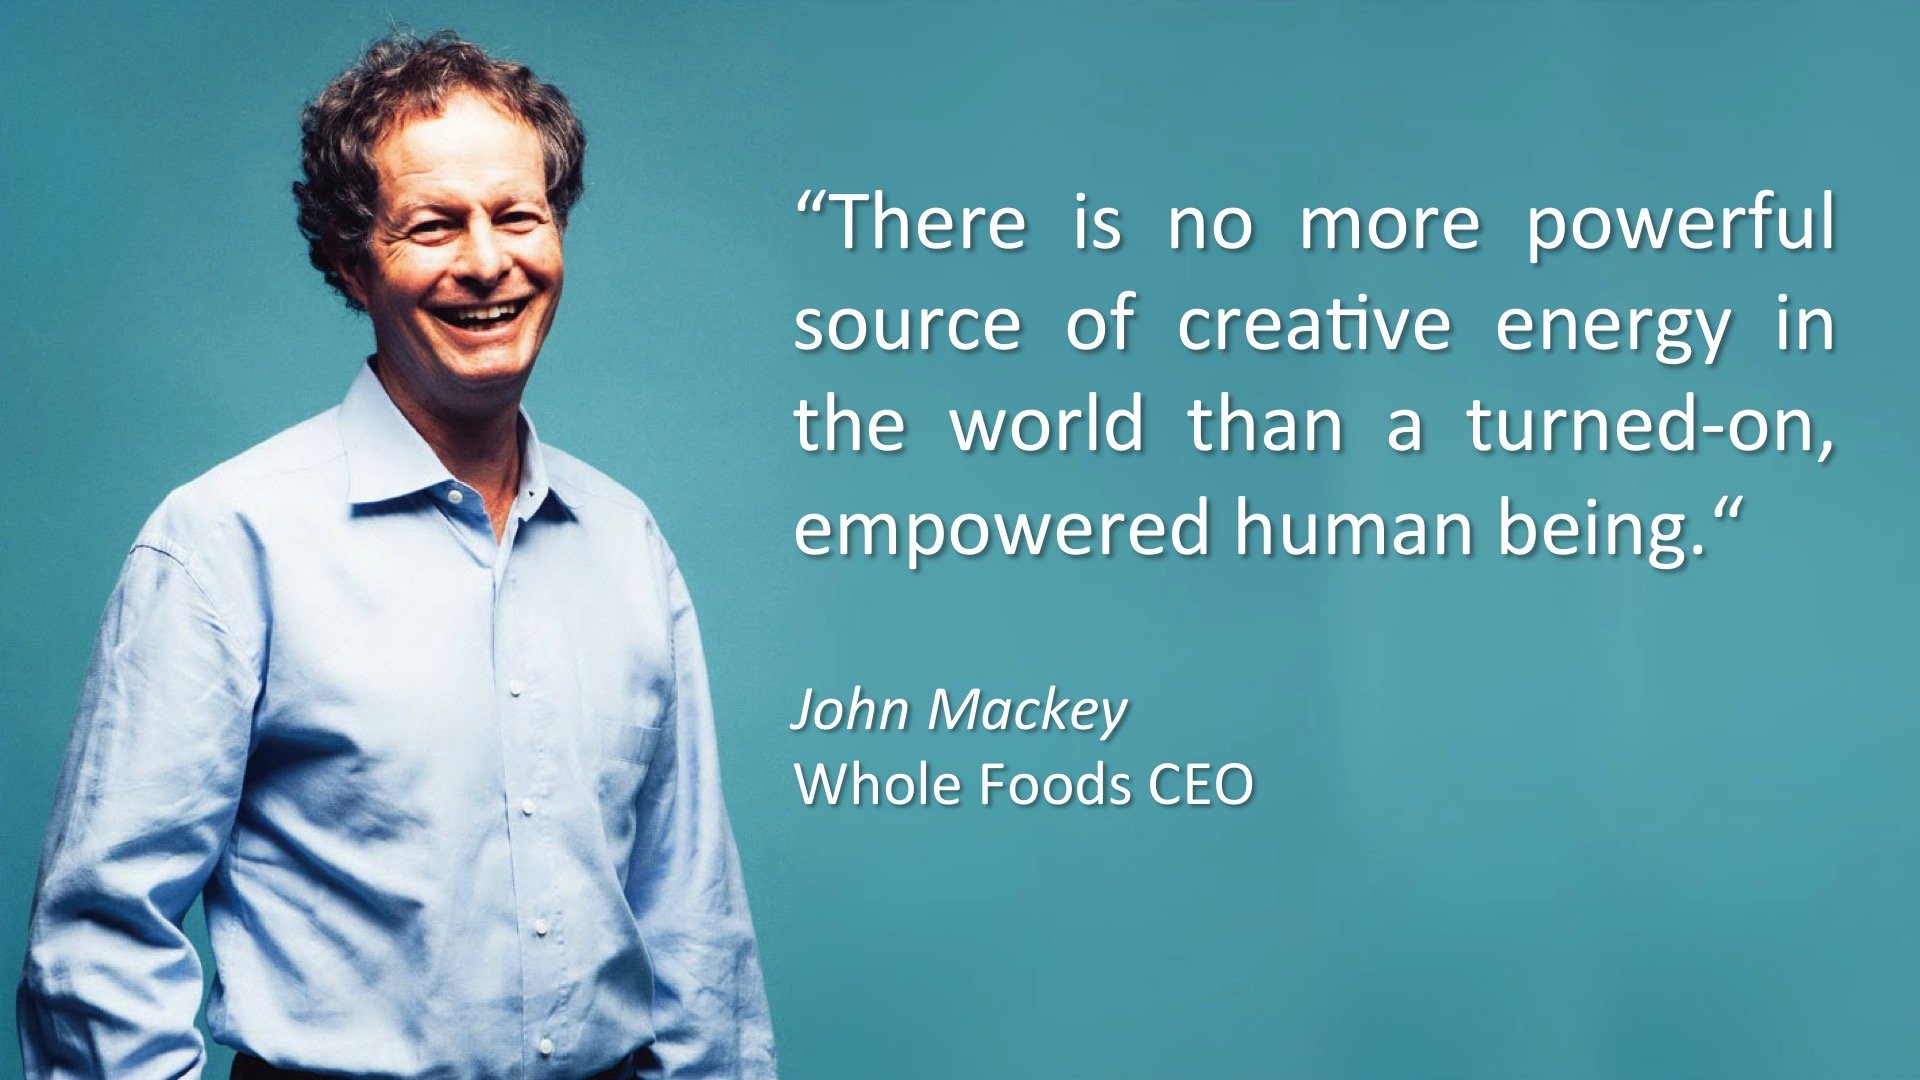 A champion of Heartfulness: "There is no more powerful source of creative energy in the world than a turned-on empowered human being." John Mackey, WholeFoods CEO